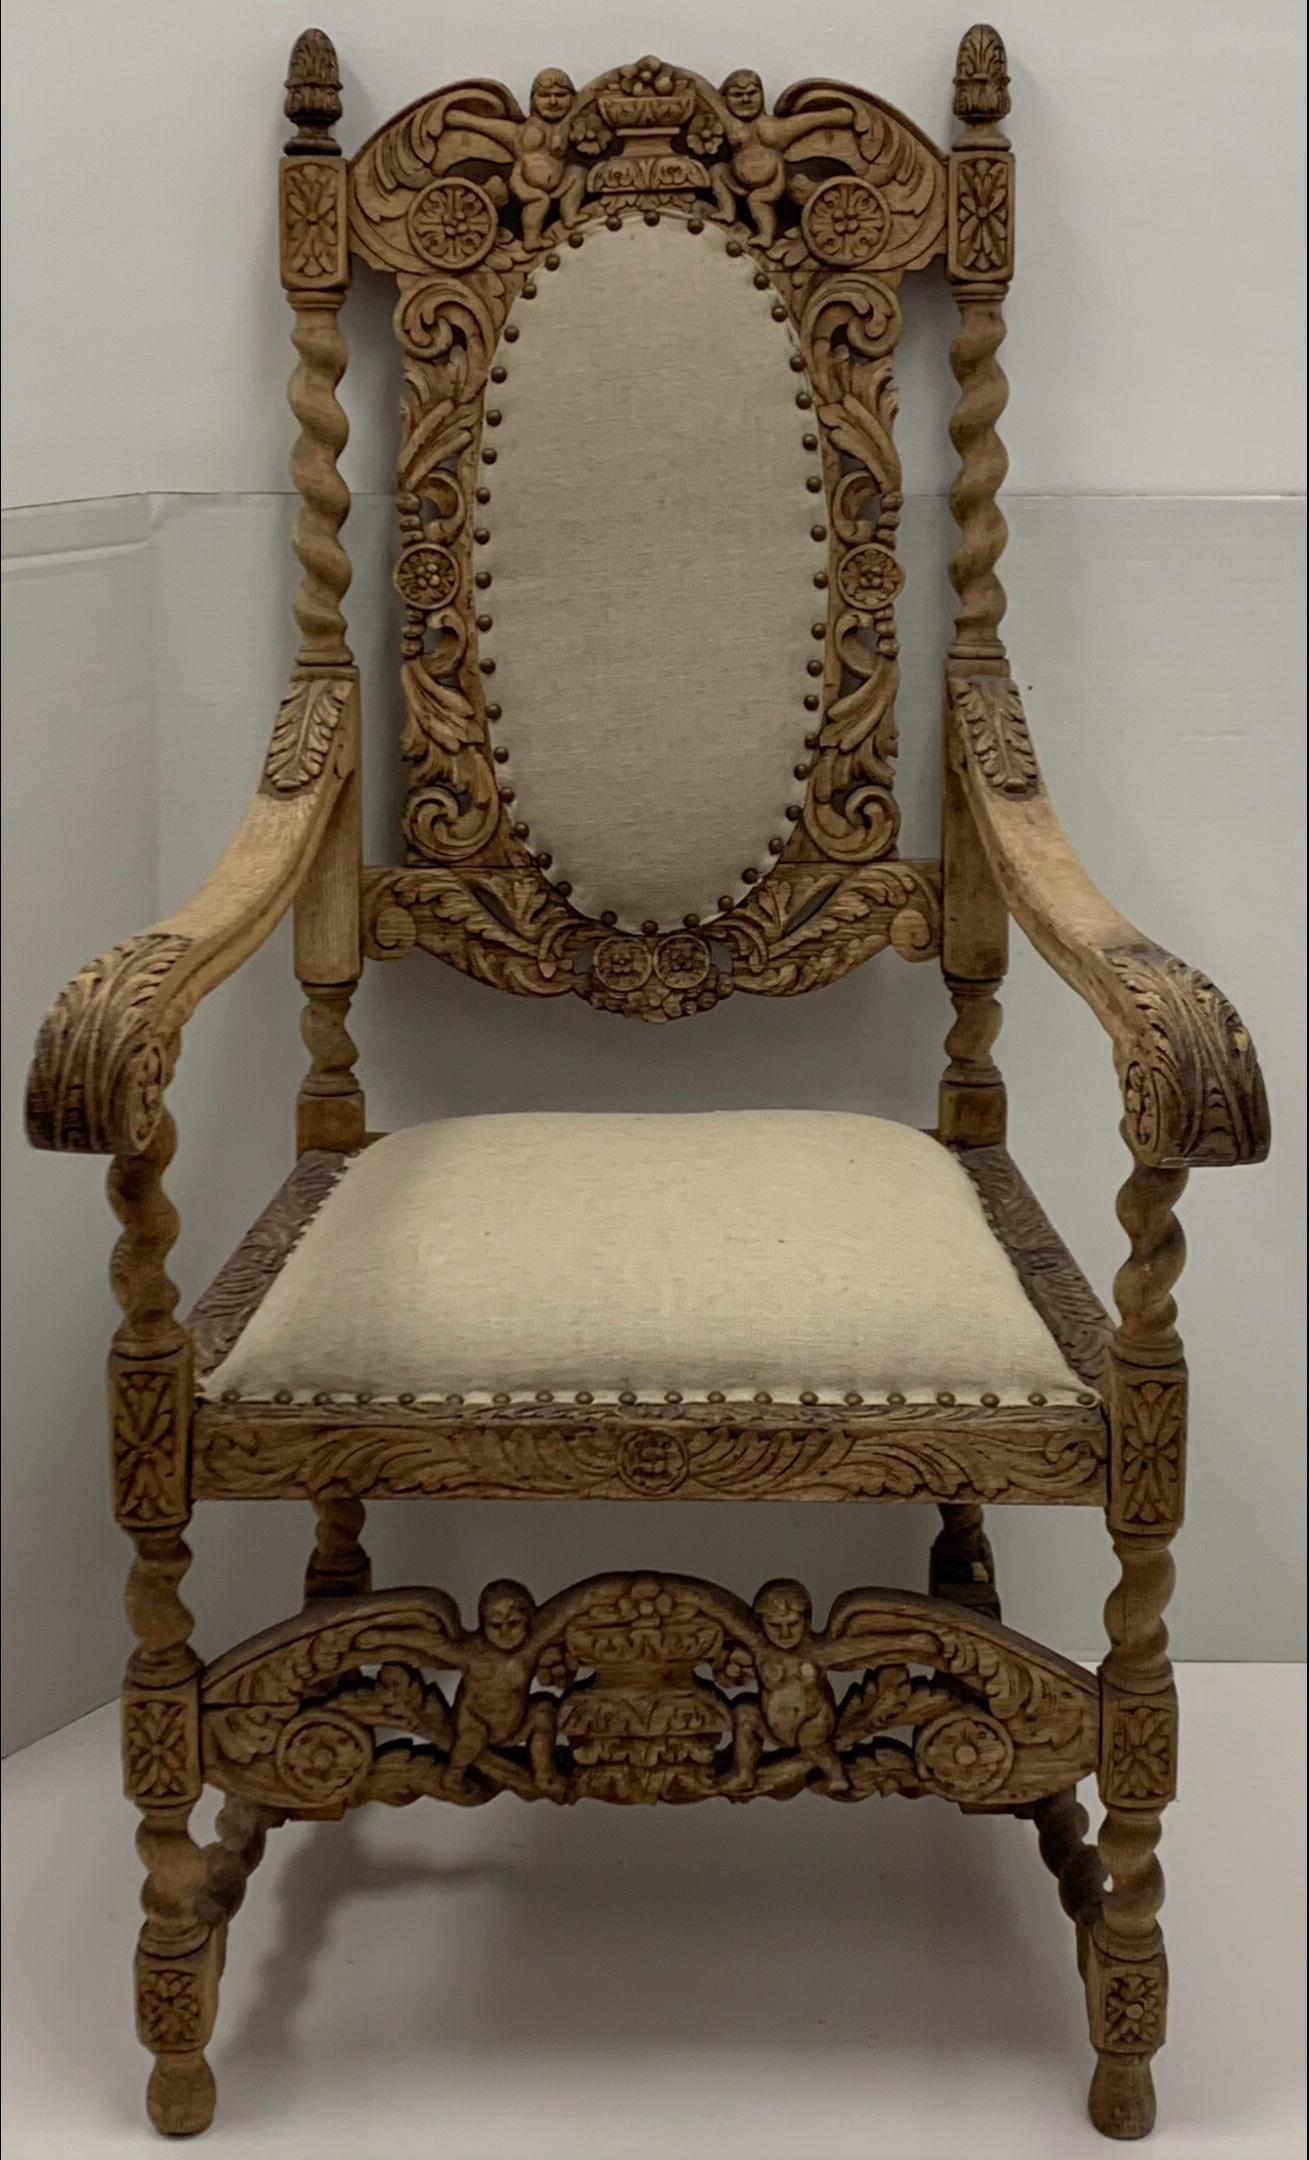 This is an early 20th century English Jacobean style stripped and bleached carved oak throne style arm chair. The linen is a recent addition. It is in very good condition.